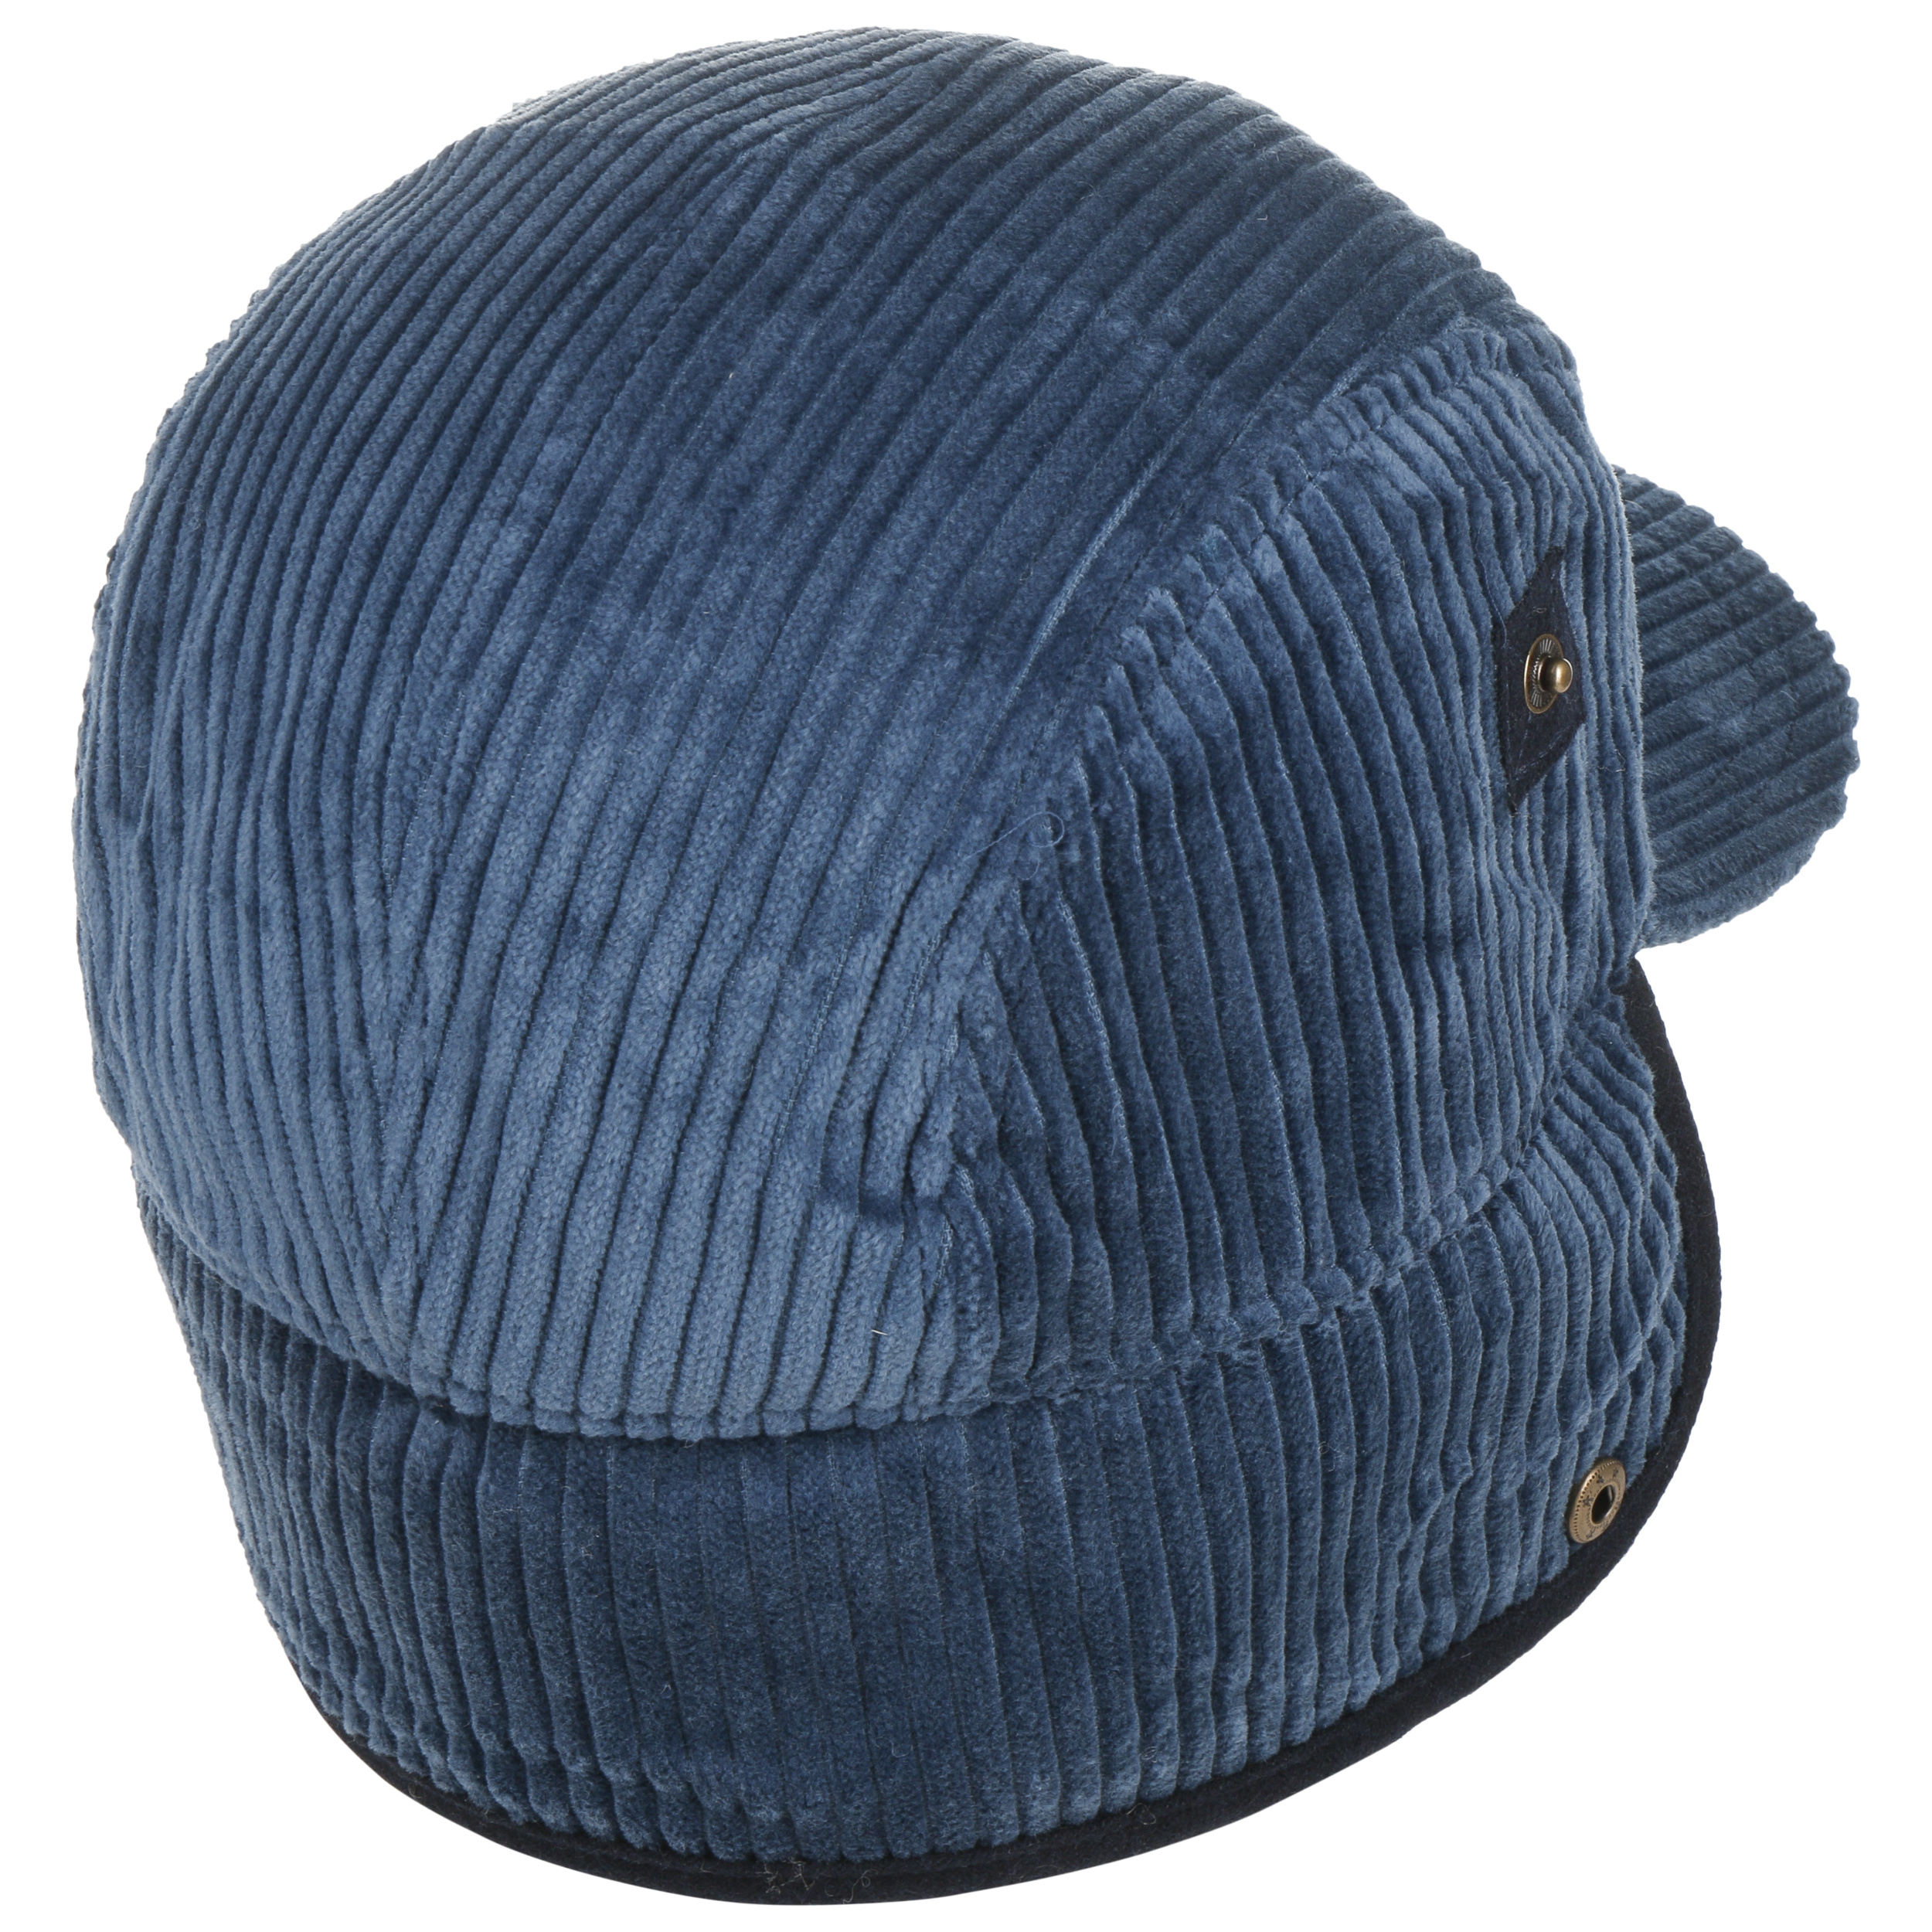 Rayner Cap with Ear Flaps by Barts - 35,95 £